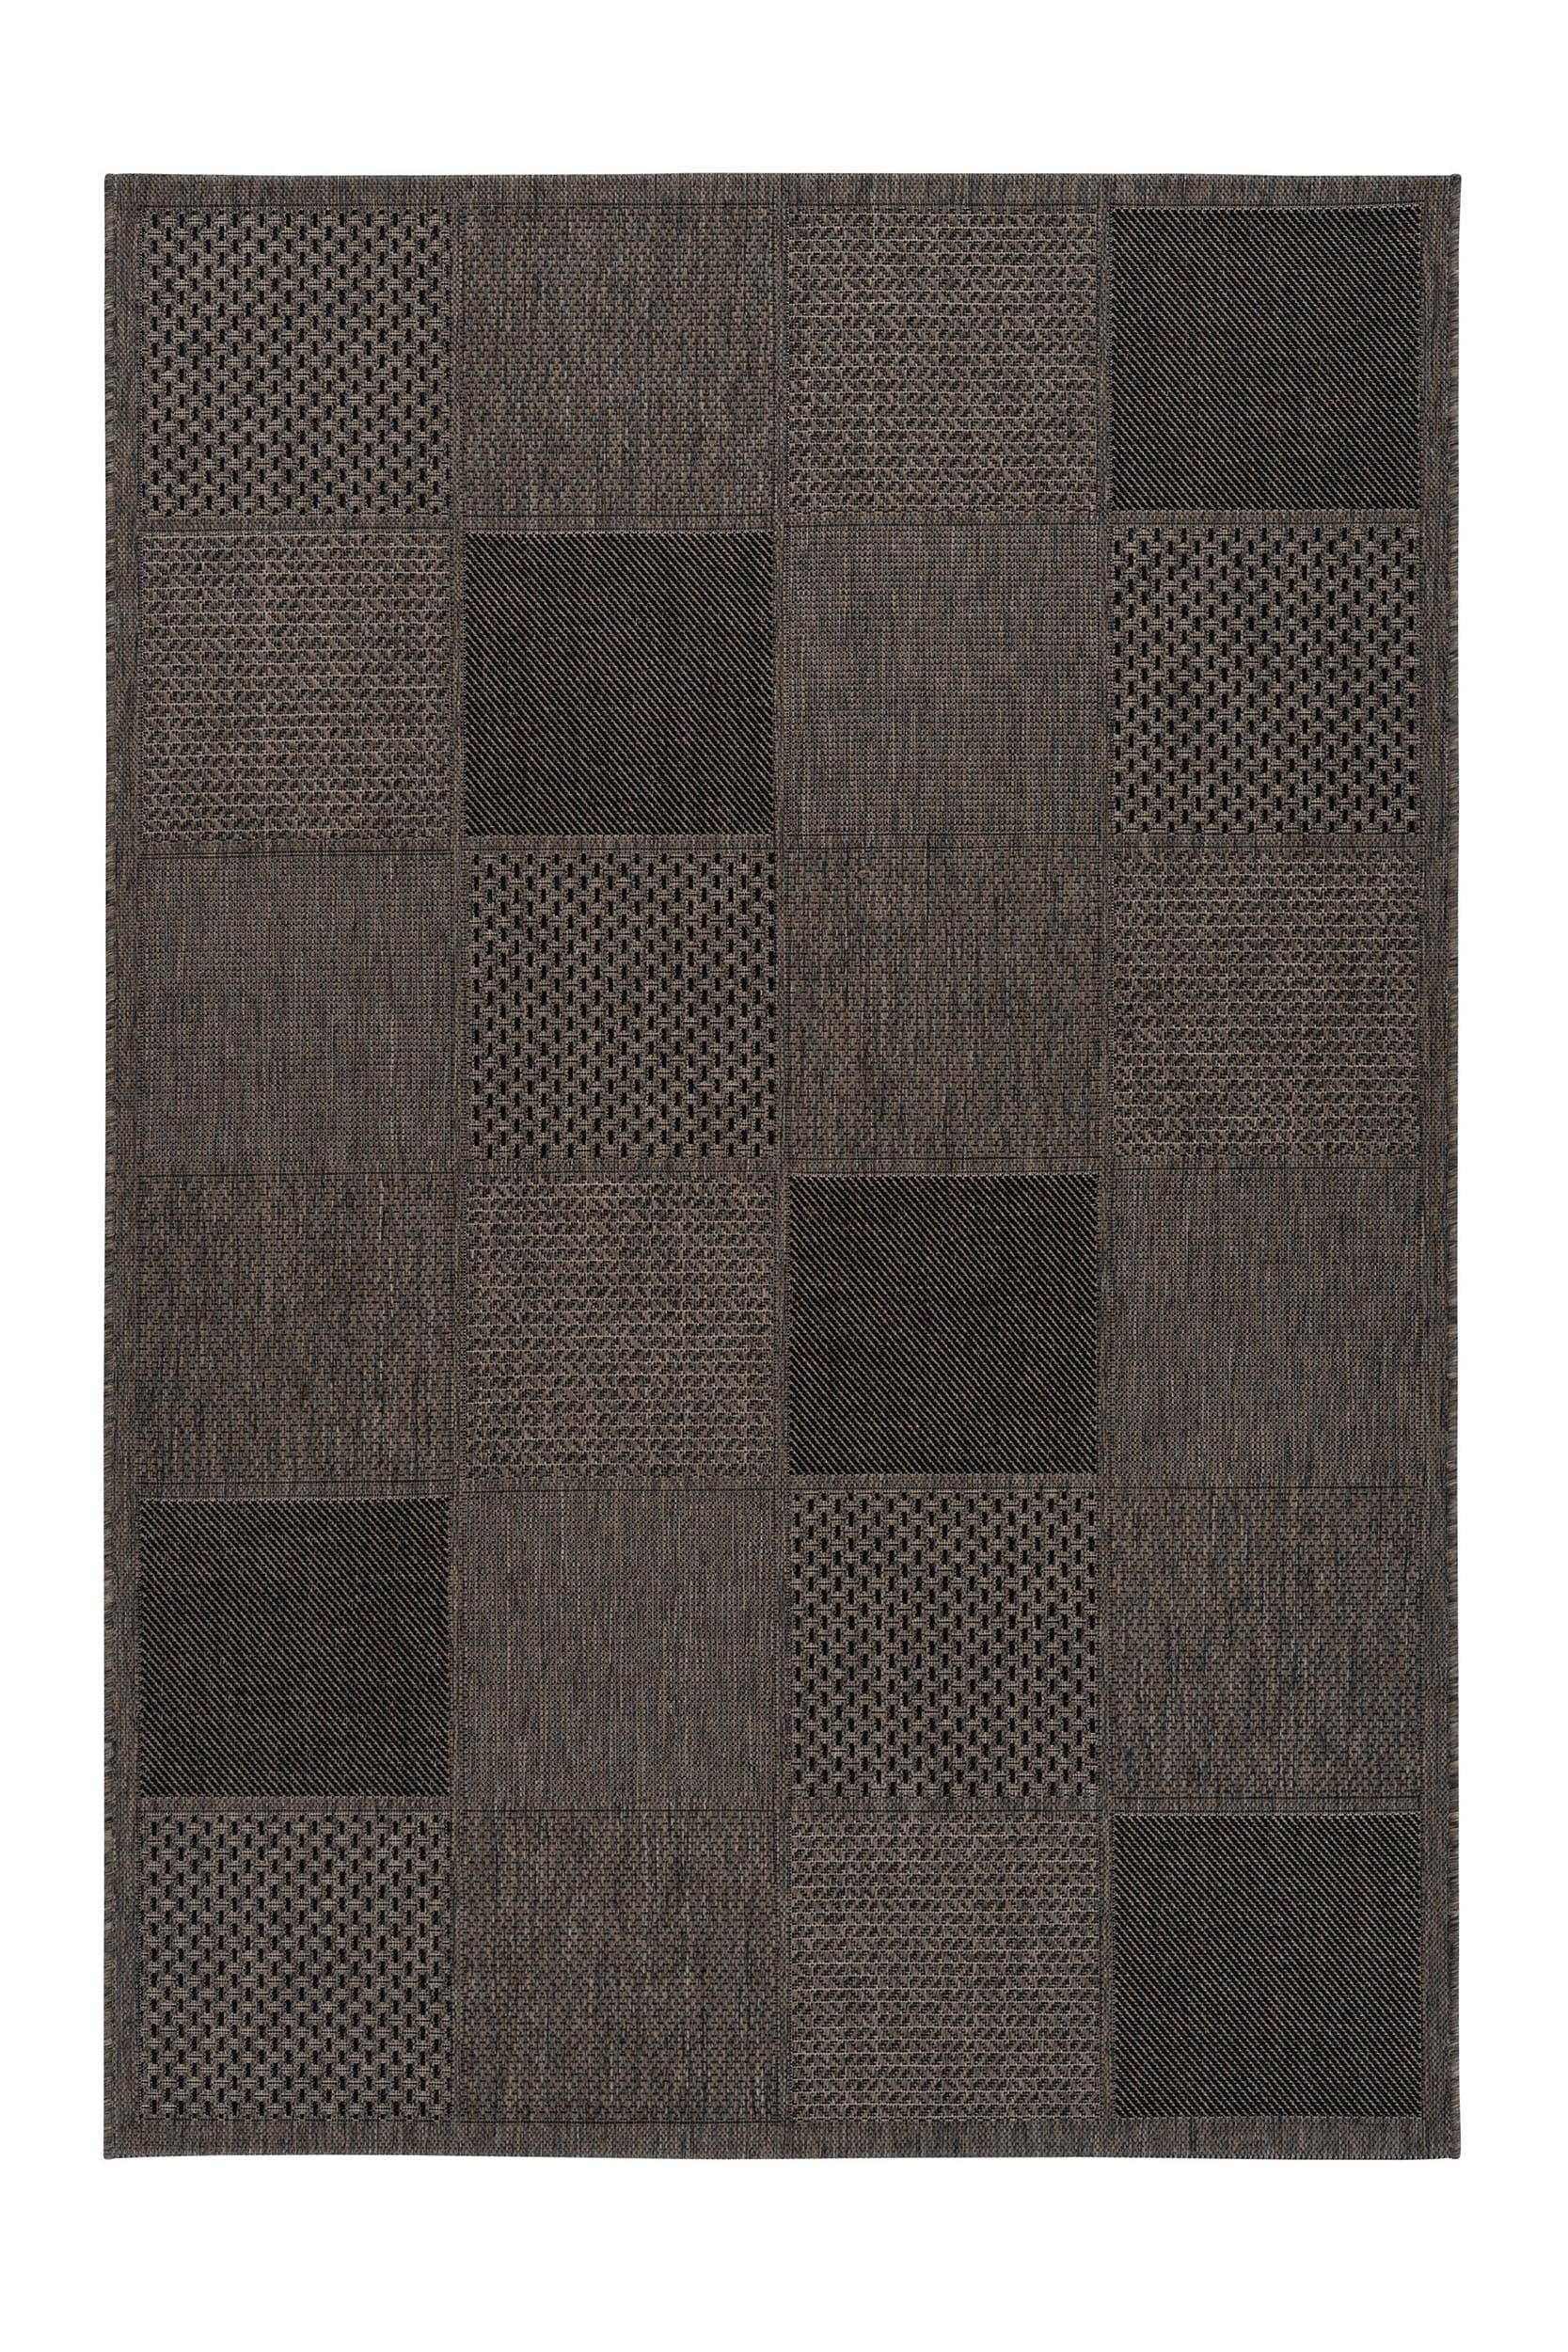 Outdoor Teppich "Sunmotion" taupe, 160x230cm